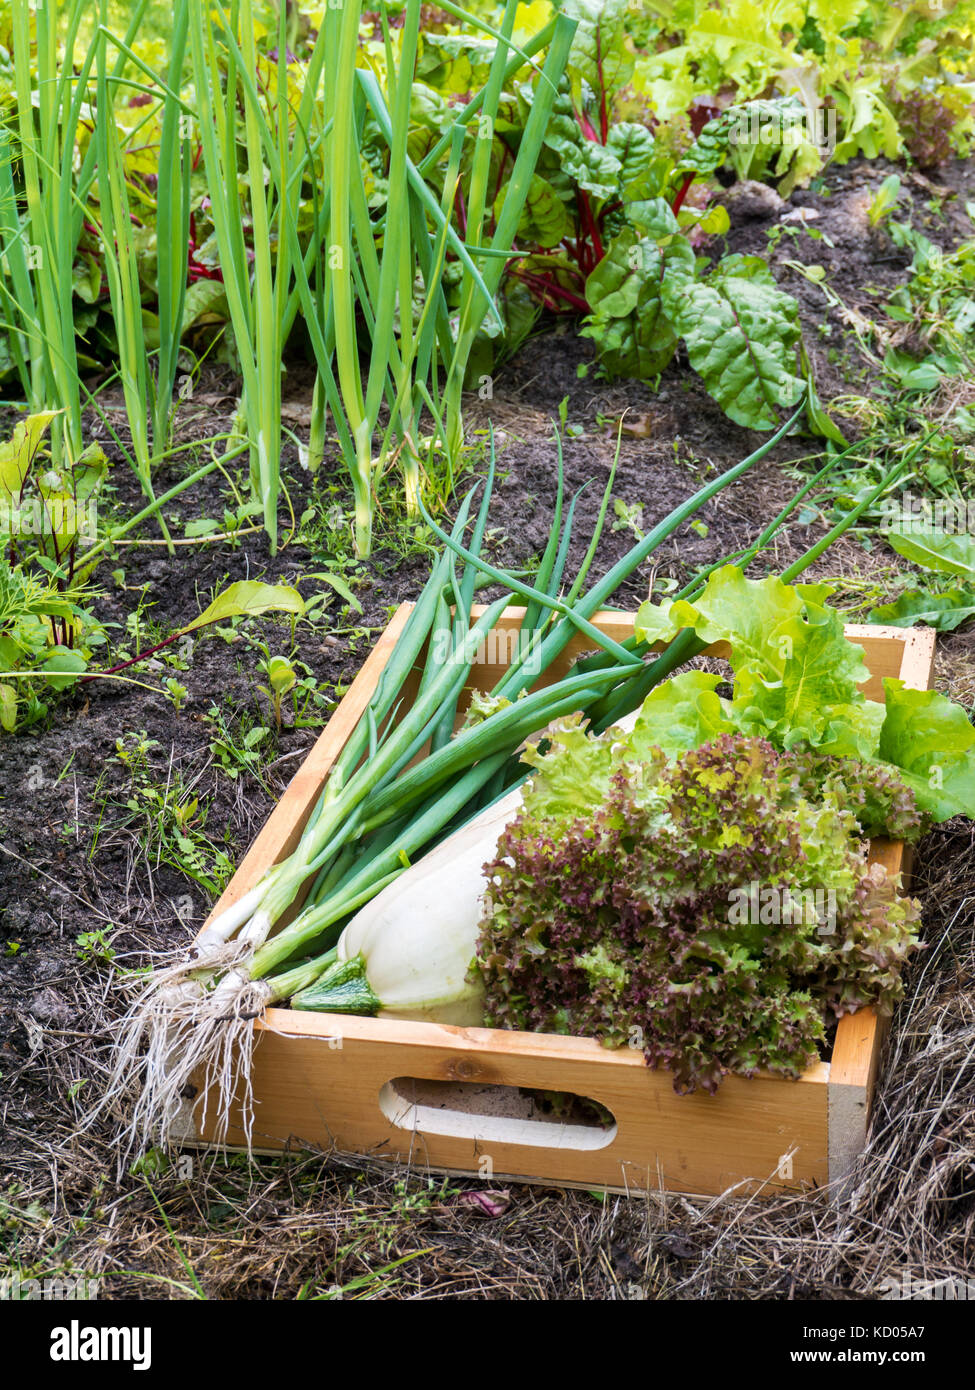 Zucchini, Lollo rosso lettuce salad and green onion in the organic vegetable garden. Vegetable beds. White marrow squash, lettuce head and green scall Stock Photo